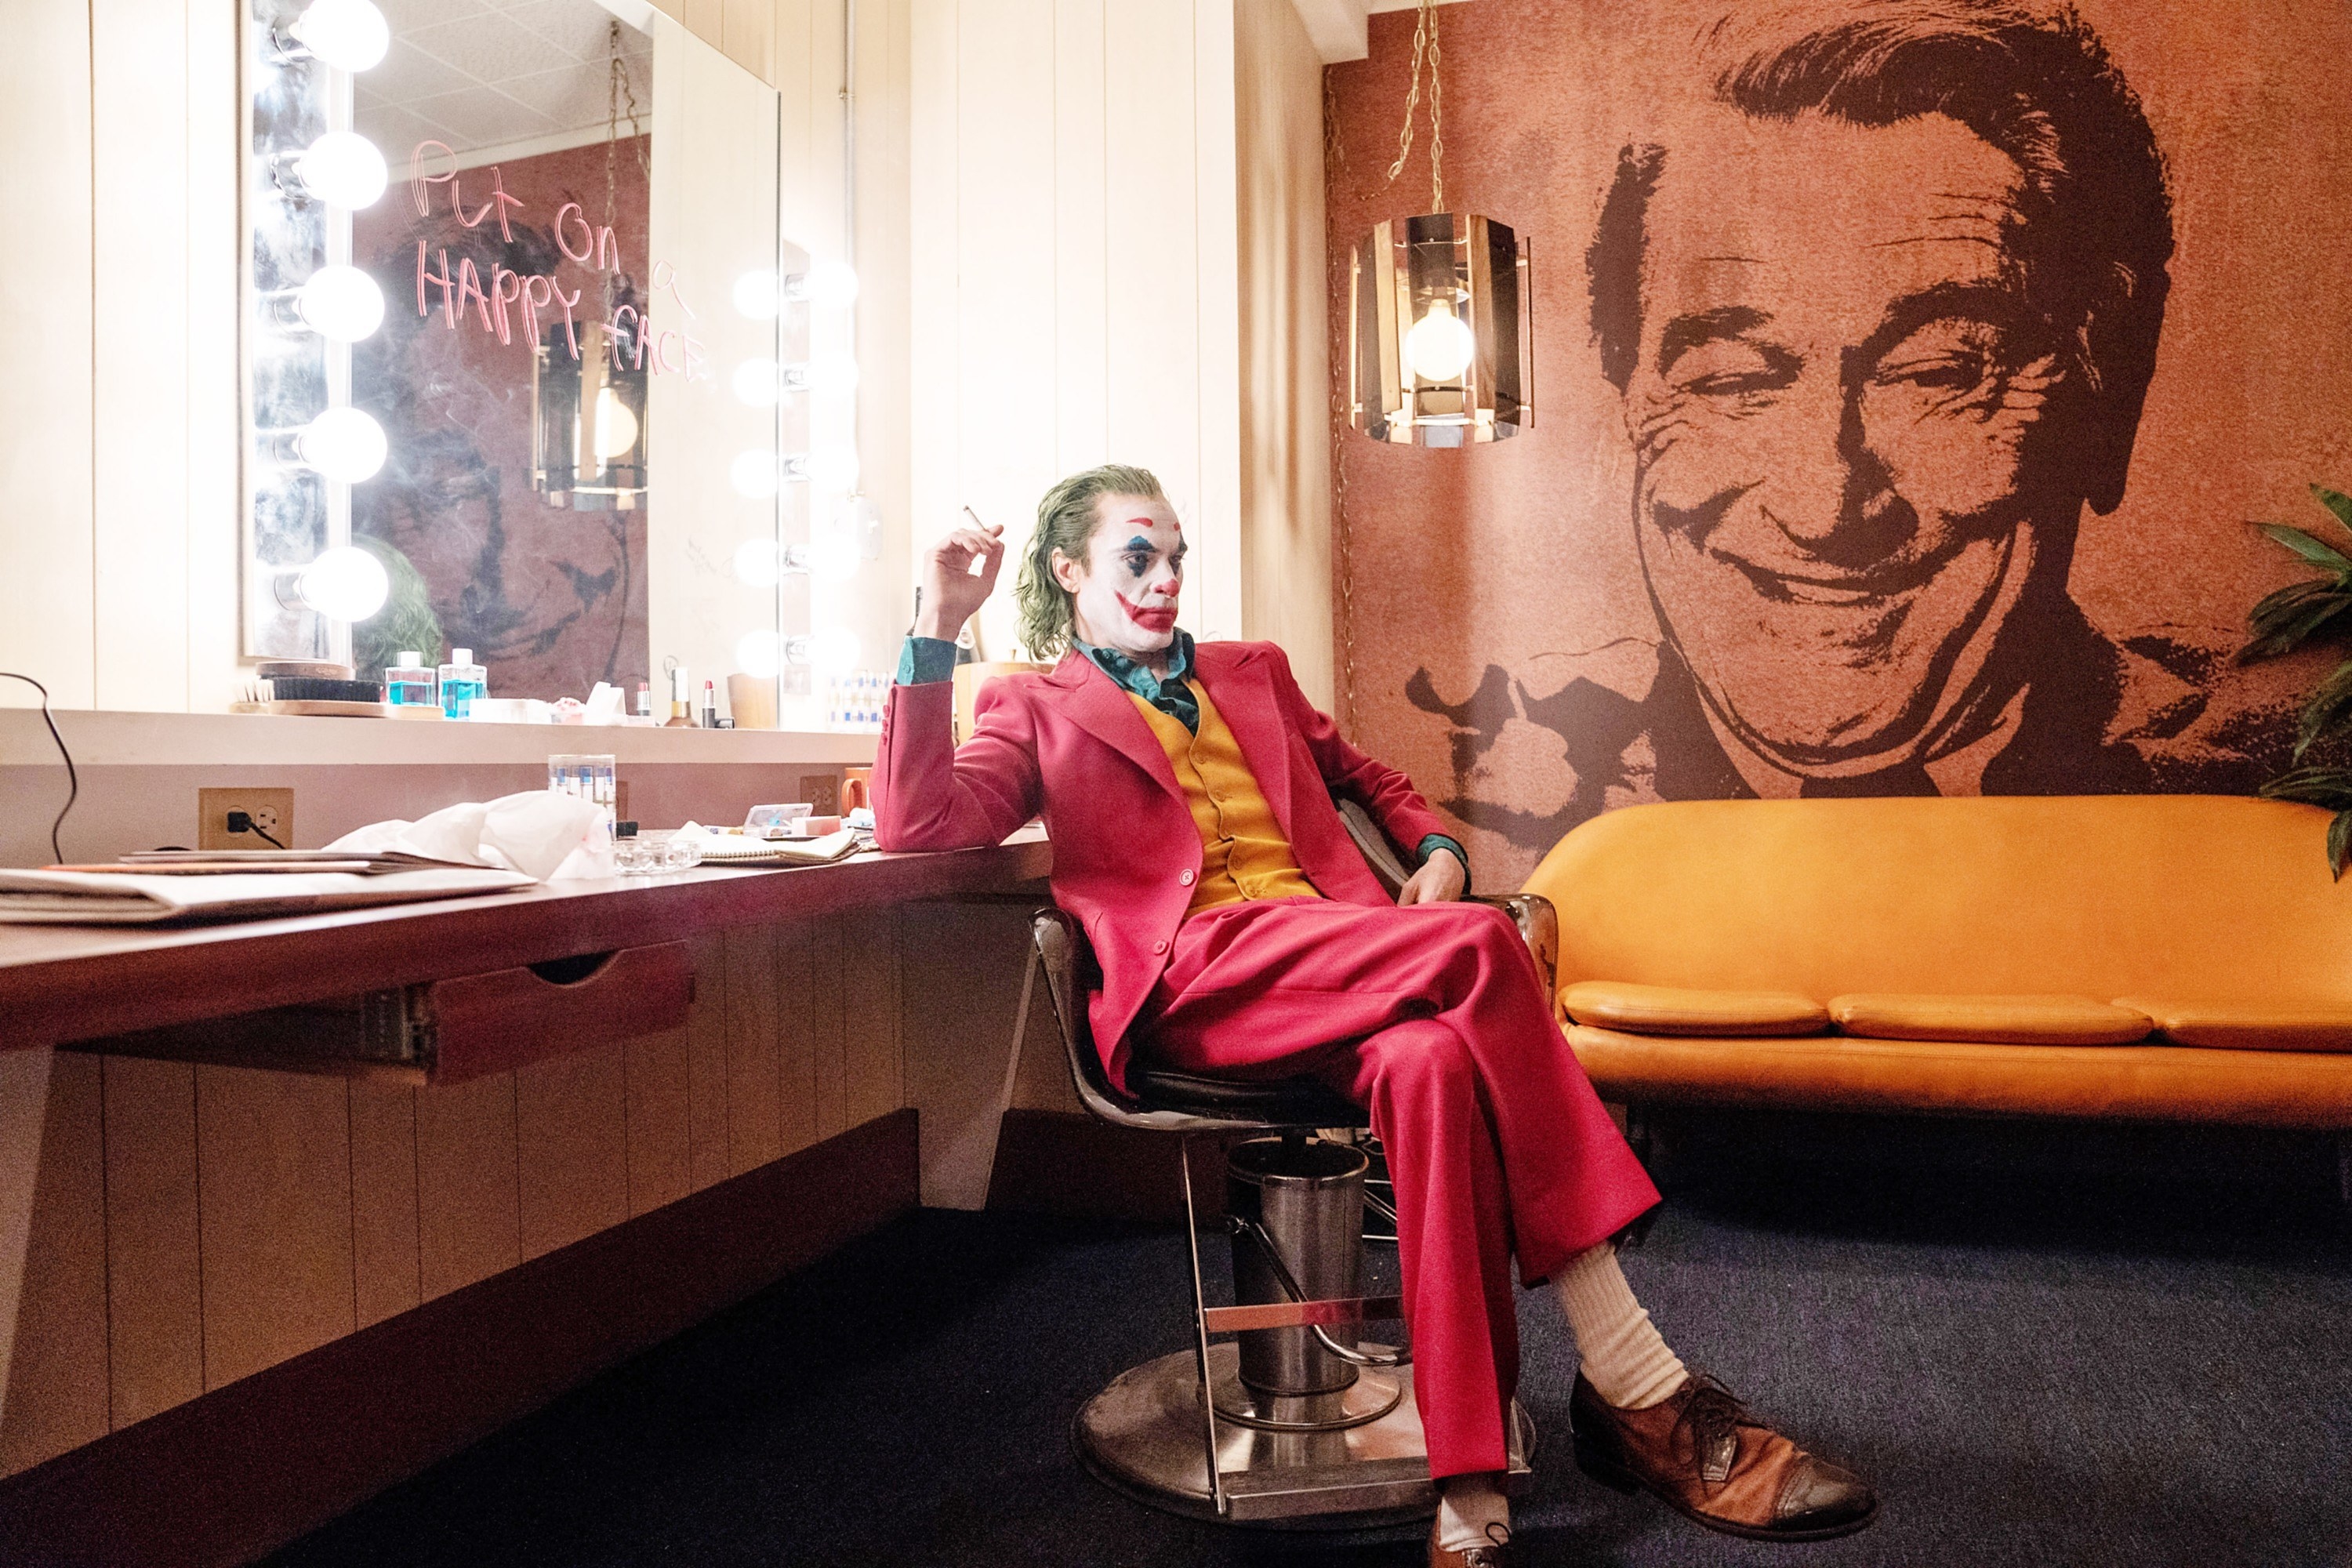 Joaquin Phoenix as the Joker sitting in a chair holding a cigarette